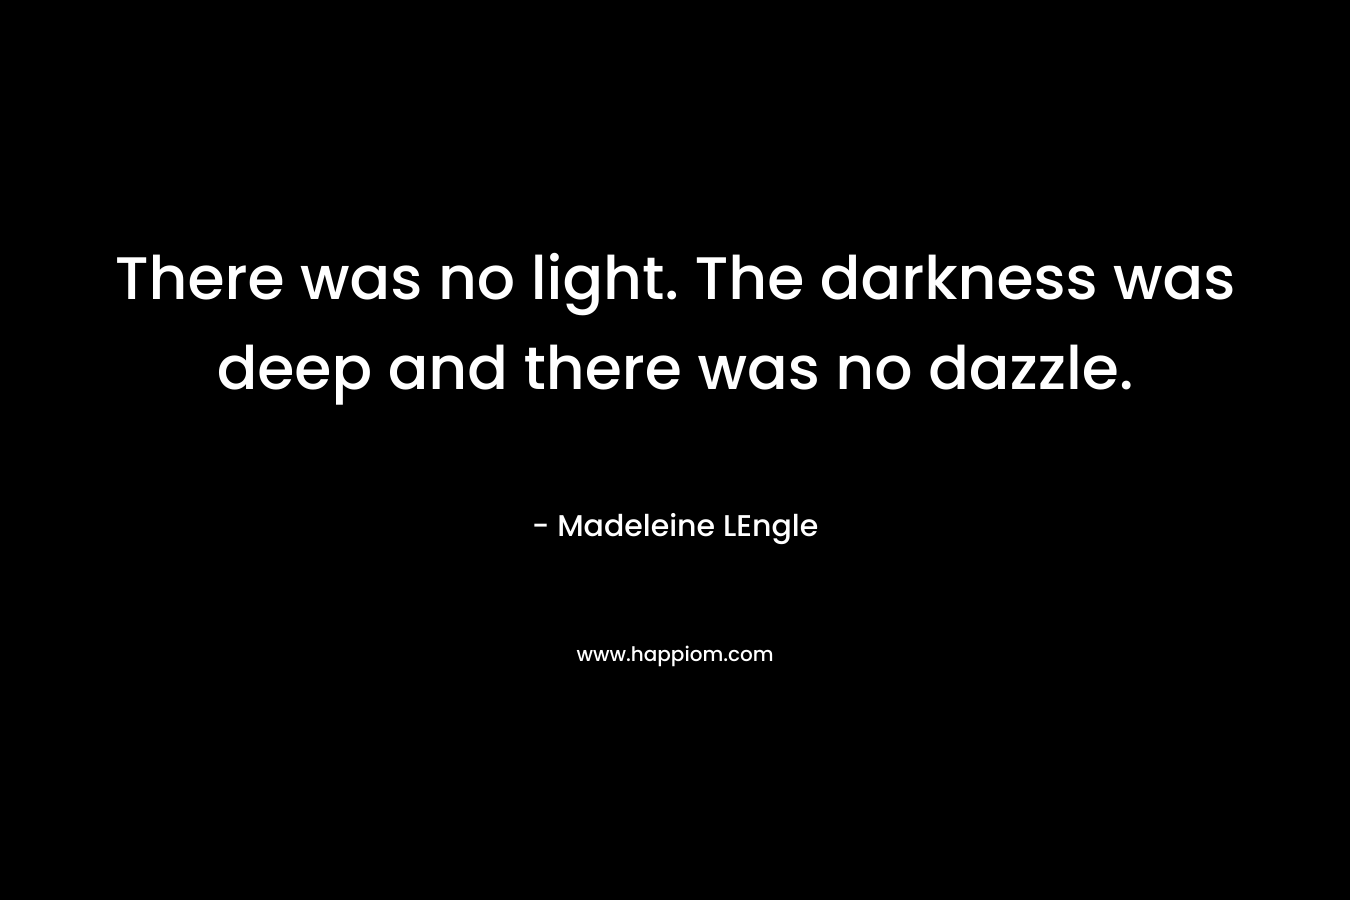 There was no light. The darkness was deep and there was no dazzle.